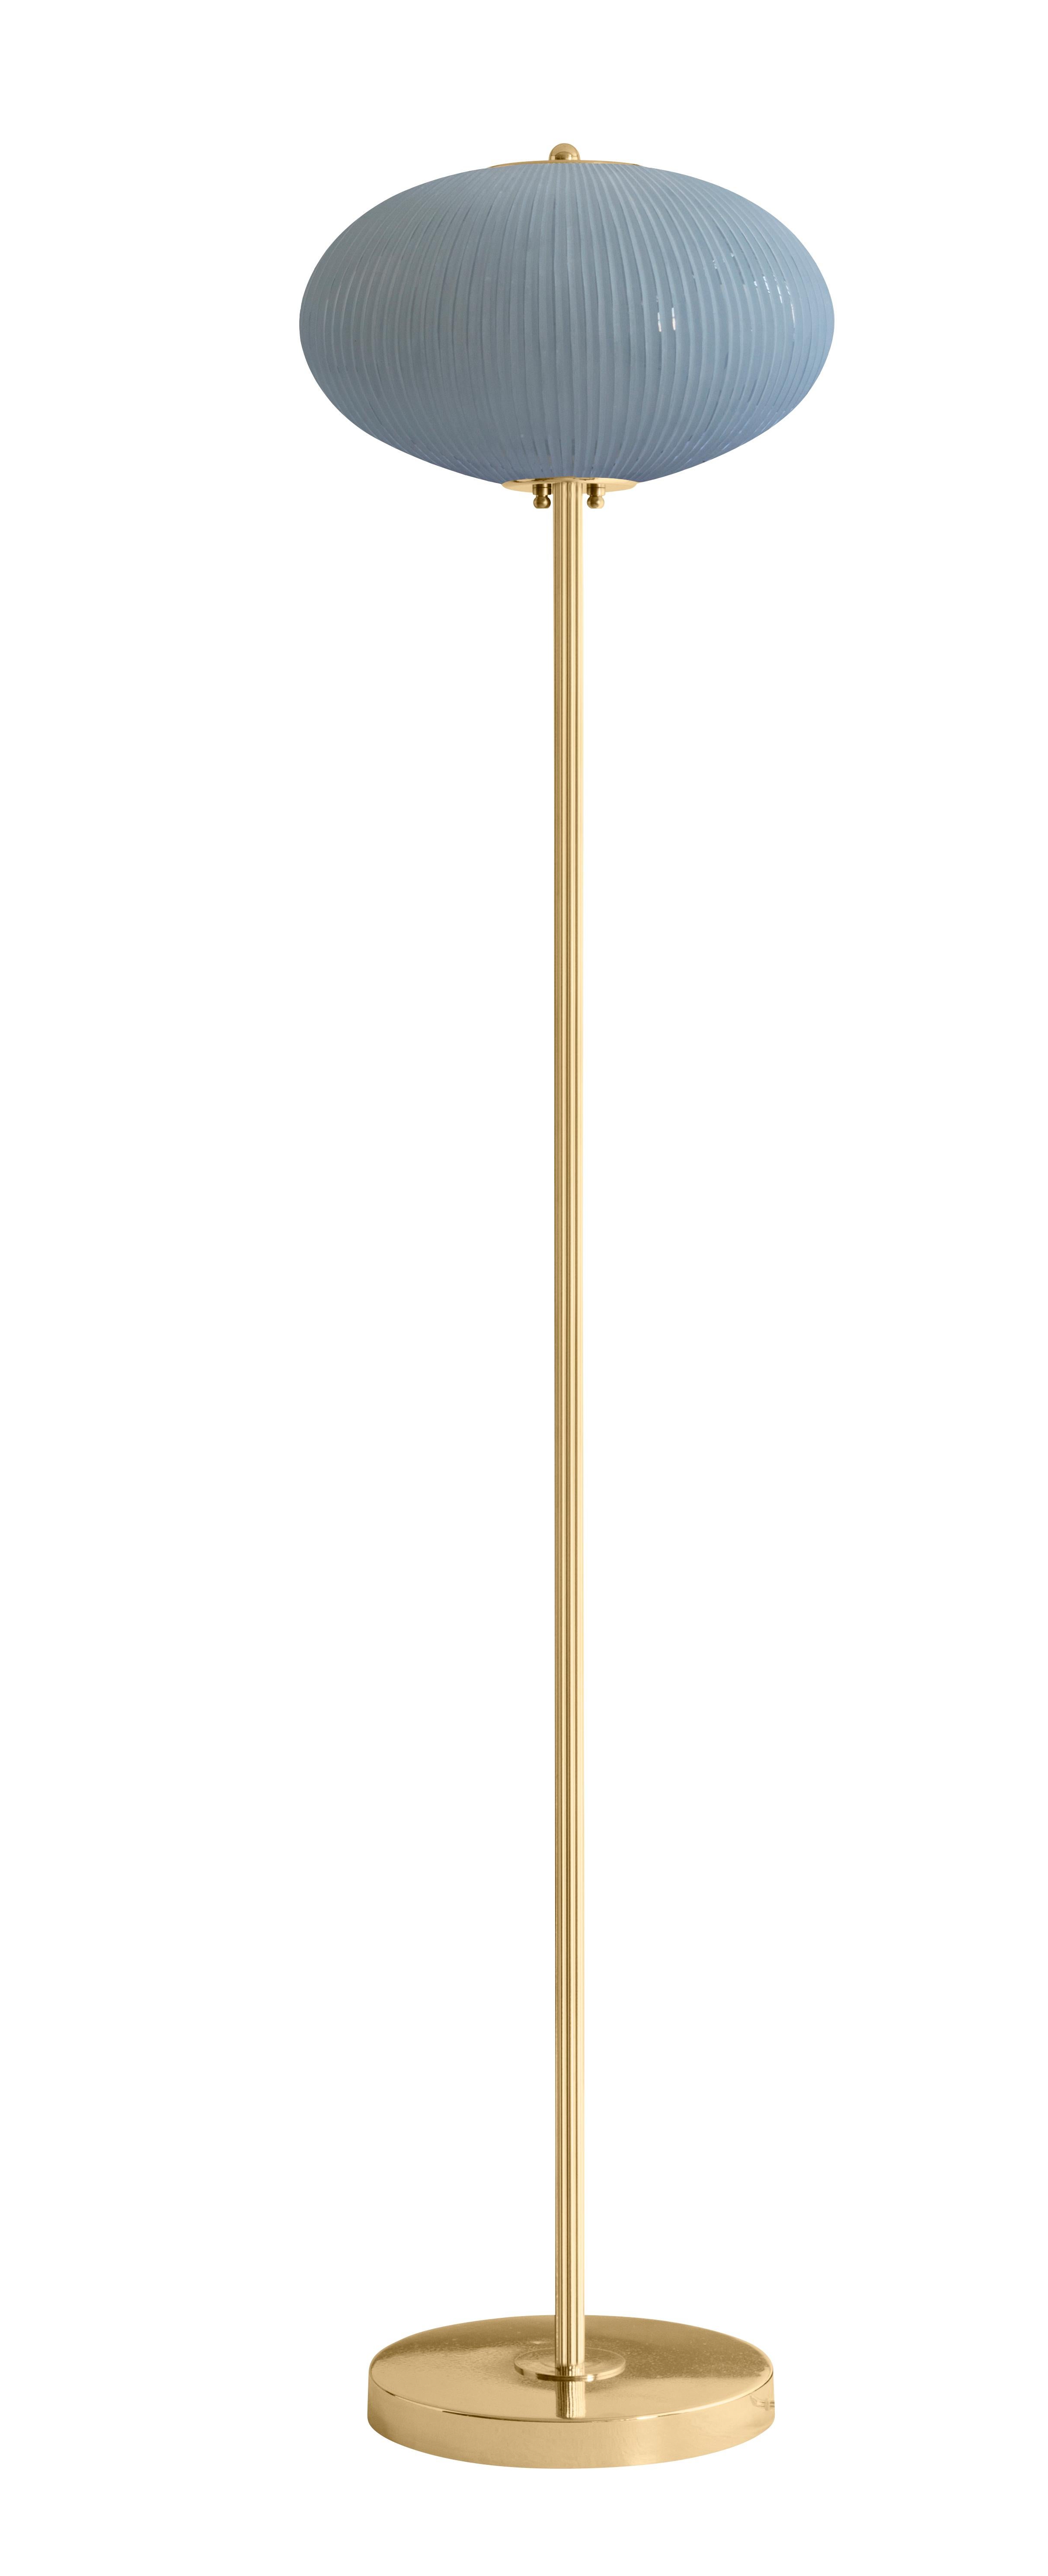 Floor lamp China 07 by Magic Circus Editions
Dimensions: H 150 x W 32 x D 32 cm, also available in H 140, 160
Materials: Brass, mouth blown glass sculpted with a diamond saw
Colour: opal grey

Available finishes: Brass, nickel
Available